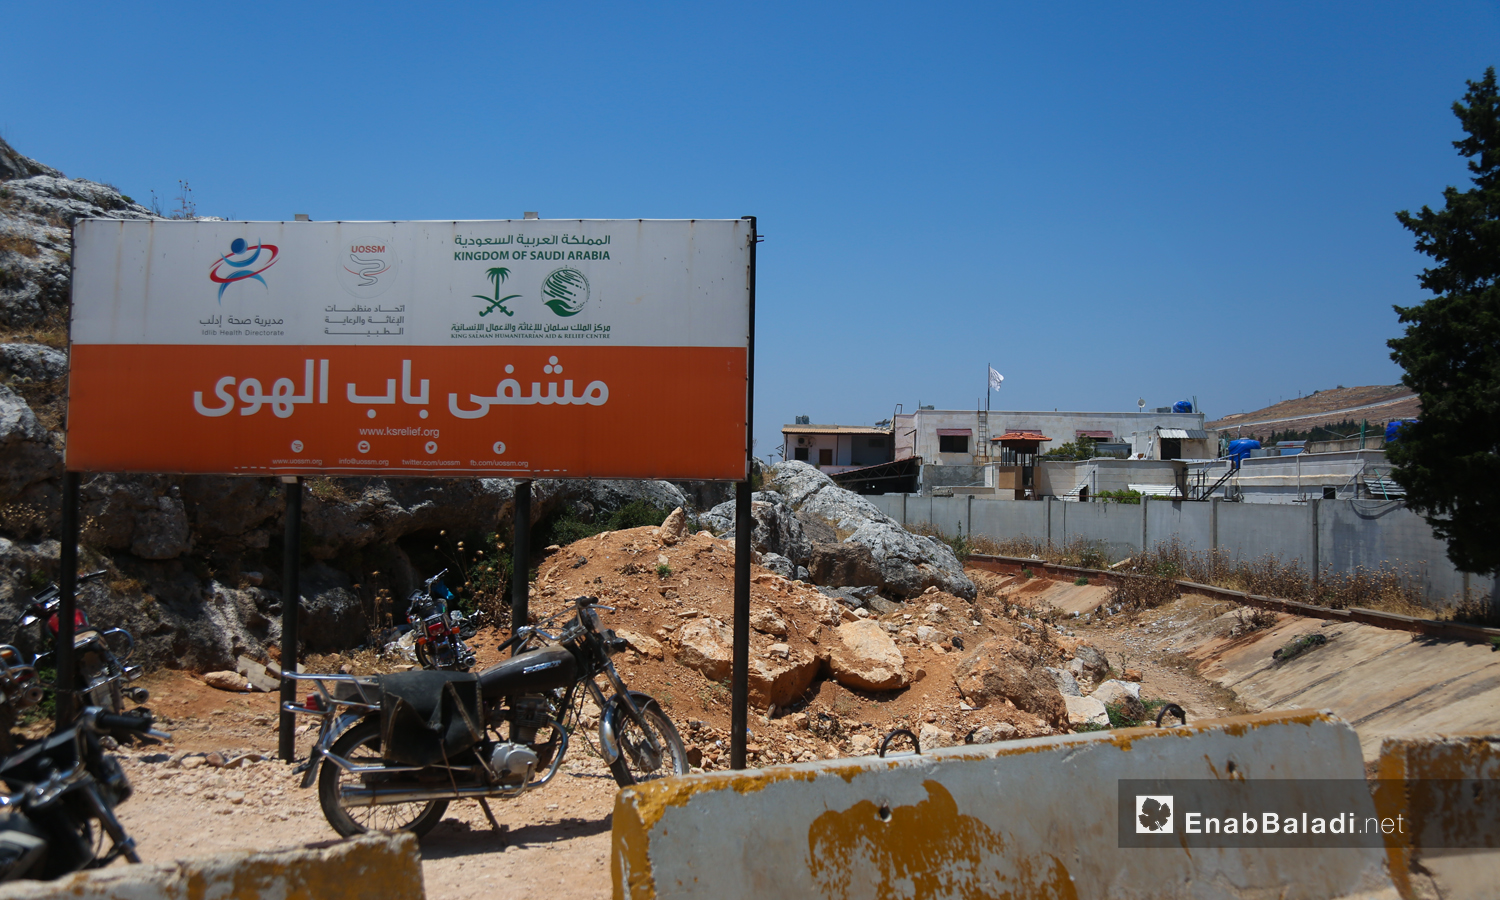 The "Bab al-Hawa" Hospital has closed and announced prevention of approaching it until the end of the quarantine – 10 July 2020 (Enab Baladi / Yousef Ghuraibi)